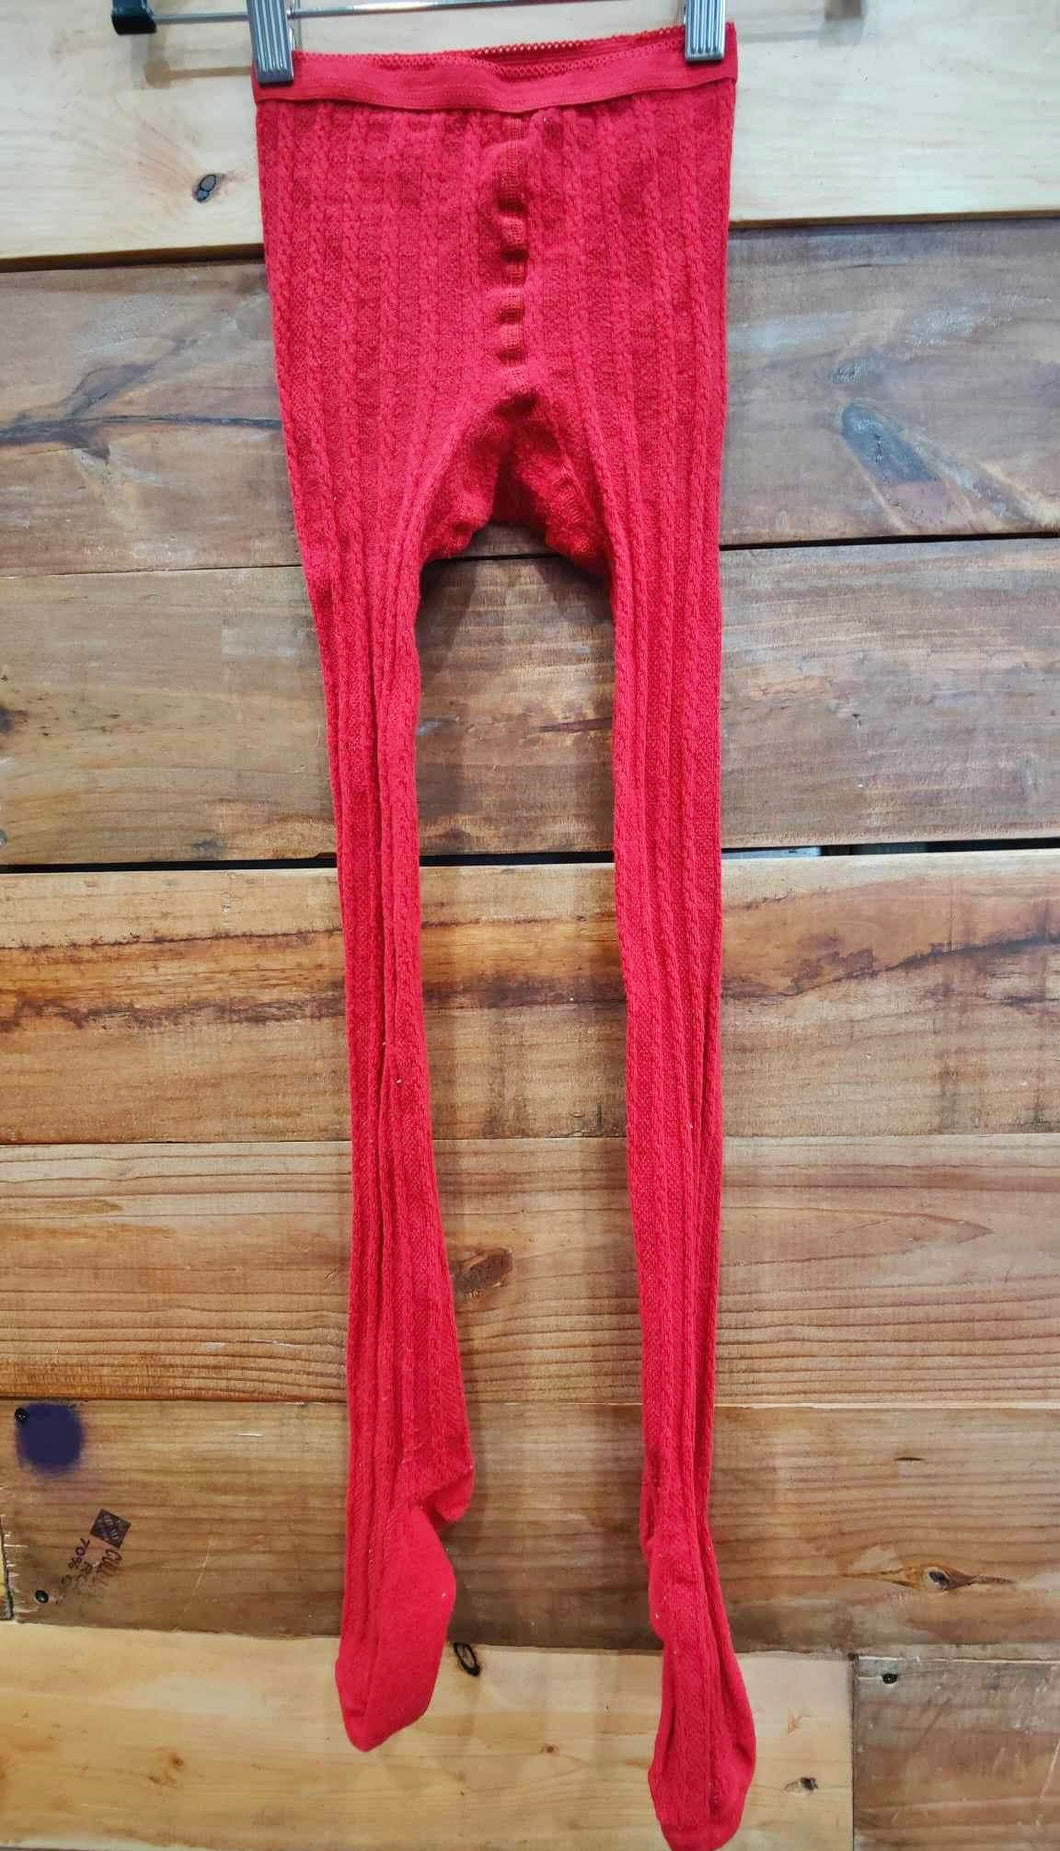 Hanna Andersson Red Knit Tights Size 10-12